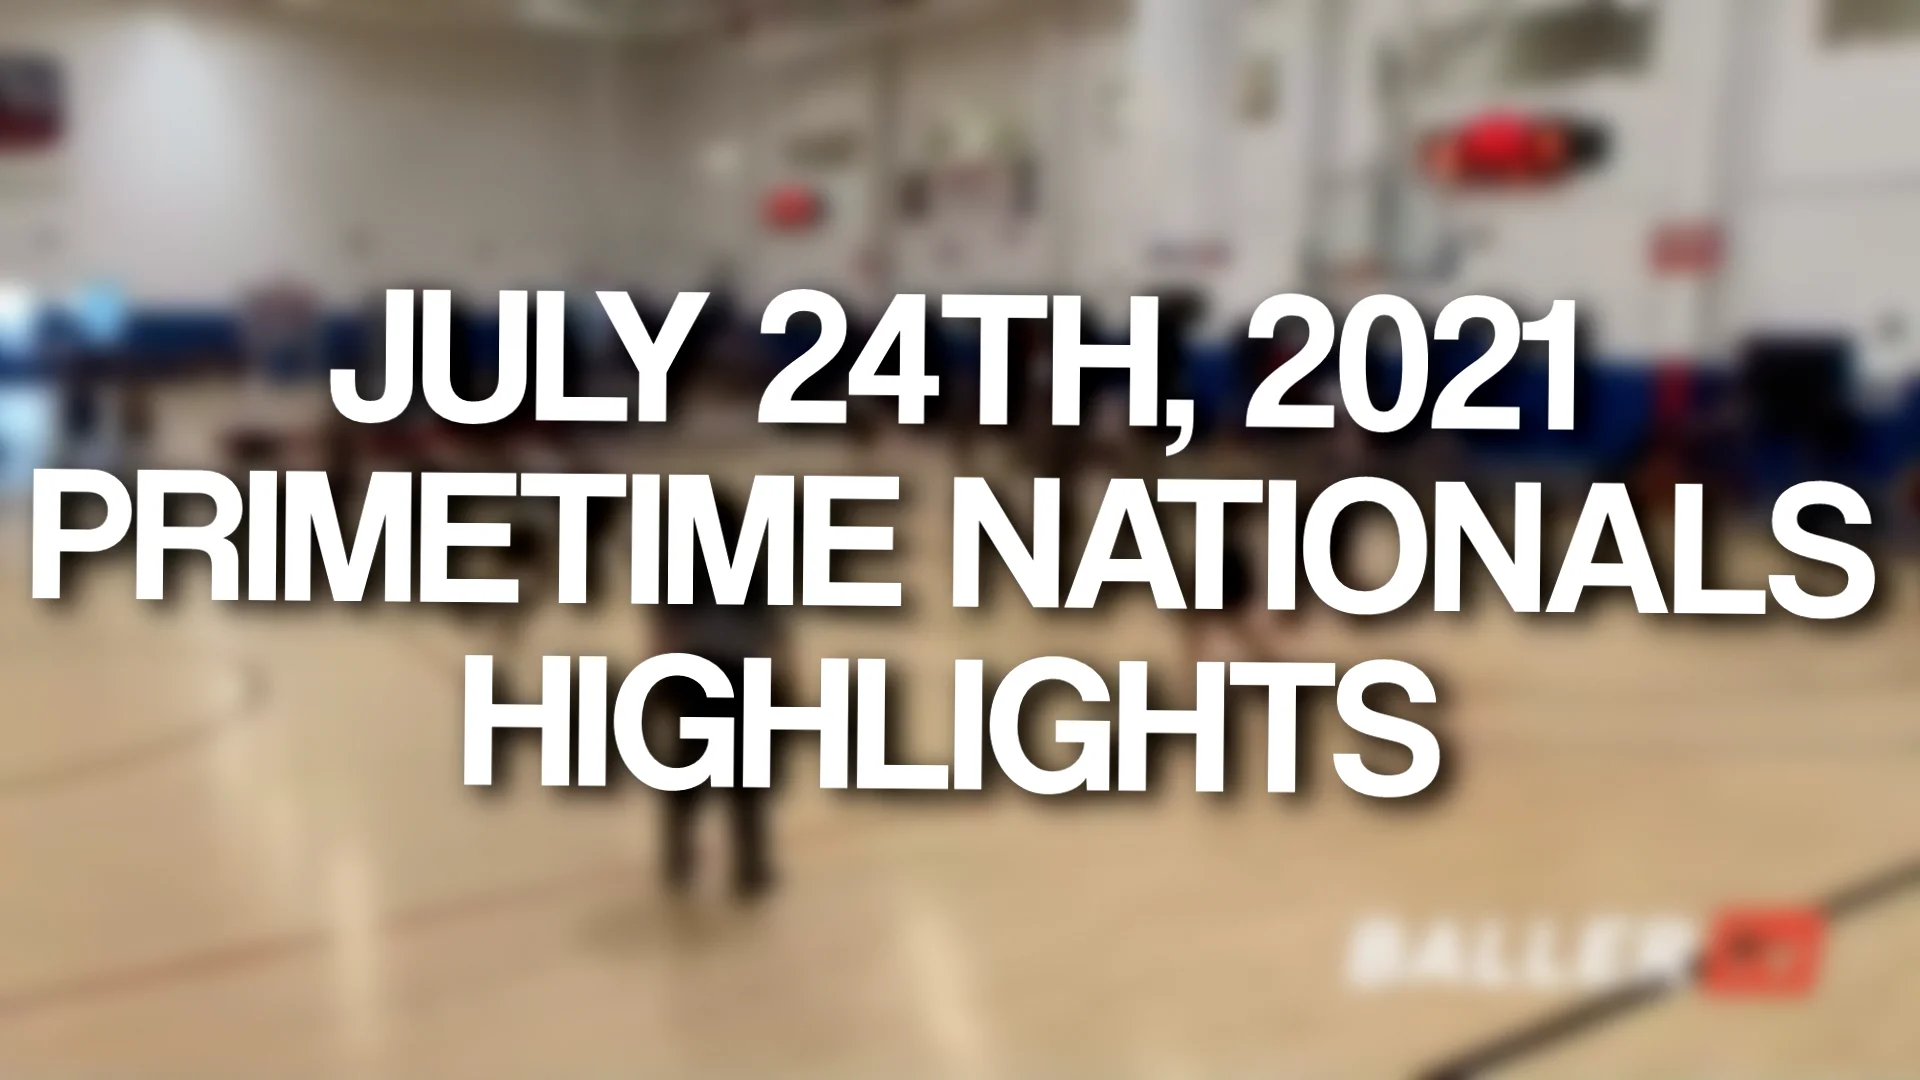 July 24th, 2021 Primetime Nationals Highlights on Vimeo